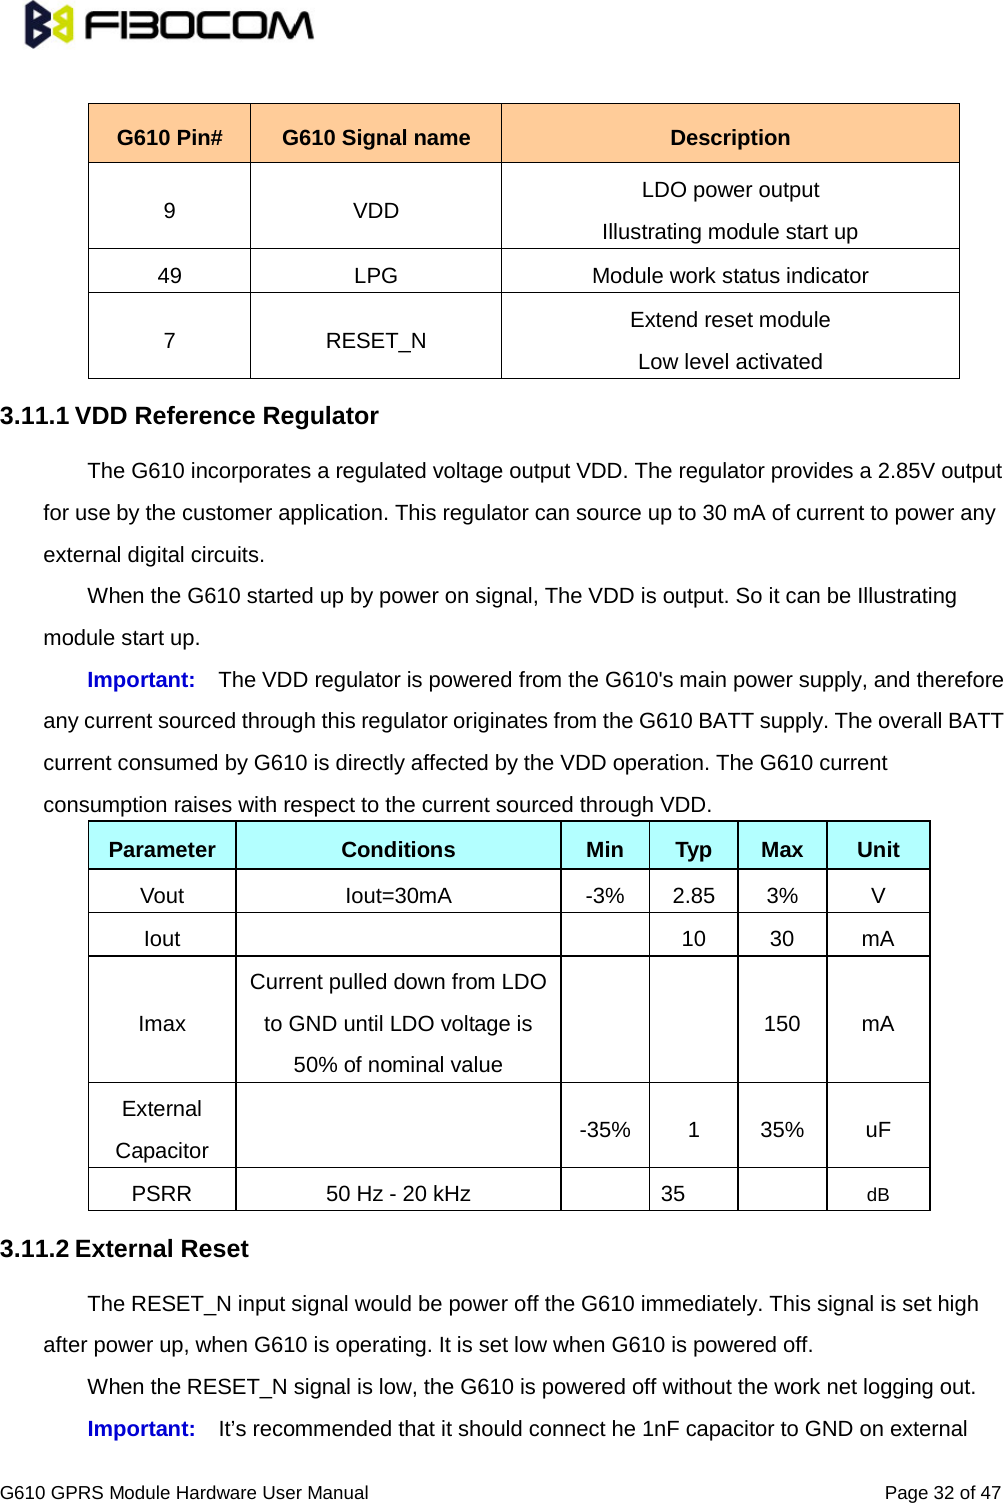                                                                                                          G610 GPRS Module Hardware User Manual                                                          Page 32 of 47   G610 Pin# G610 Signal name Description 9  VDD LDO power output Illustrating module start up 49 LPG Module work status indicator 7  RESET_N Extend reset module Low level activated 3.11.1 VDD Reference Regulator   The G610 incorporates a regulated voltage output VDD. The regulator provides a 2.85V output for use by the customer application. This regulator can source up to 30 mA of current to power any external digital circuits.   When the G610 started up by power on signal, The VDD is output. So it can be Illustrating module start up. Important: The VDD regulator is powered from the G610&apos;s main power supply, and therefore any current sourced through this regulator originates from the G610 BATT supply. The overall BATT current consumed by G610 is directly affected by the VDD operation. The G610 current consumption raises with respect to the current sourced through VDD.   Parameter Conditions Min Typ Max Unit Vout Iout=30mA  -3% 2.85 3%  V Iout      10 30 mA Imax Current pulled down from LDO to GND until LDO voltage is 50% of nominal value     150 mA External Capacitor   -35%  1  35% uF PSRR 50 Hz - 20 kHz    35    dB 3.11.2 External Reset   The RESET_N input signal would be power off the G610 immediately. This signal is set high after power up, when G610 is operating. It is set low when G610 is powered off.   When the RESET_N signal is low, the G610 is powered off without the work net logging out.   Important: It’s recommended that it should connect he 1nF capacitor to GND on external 